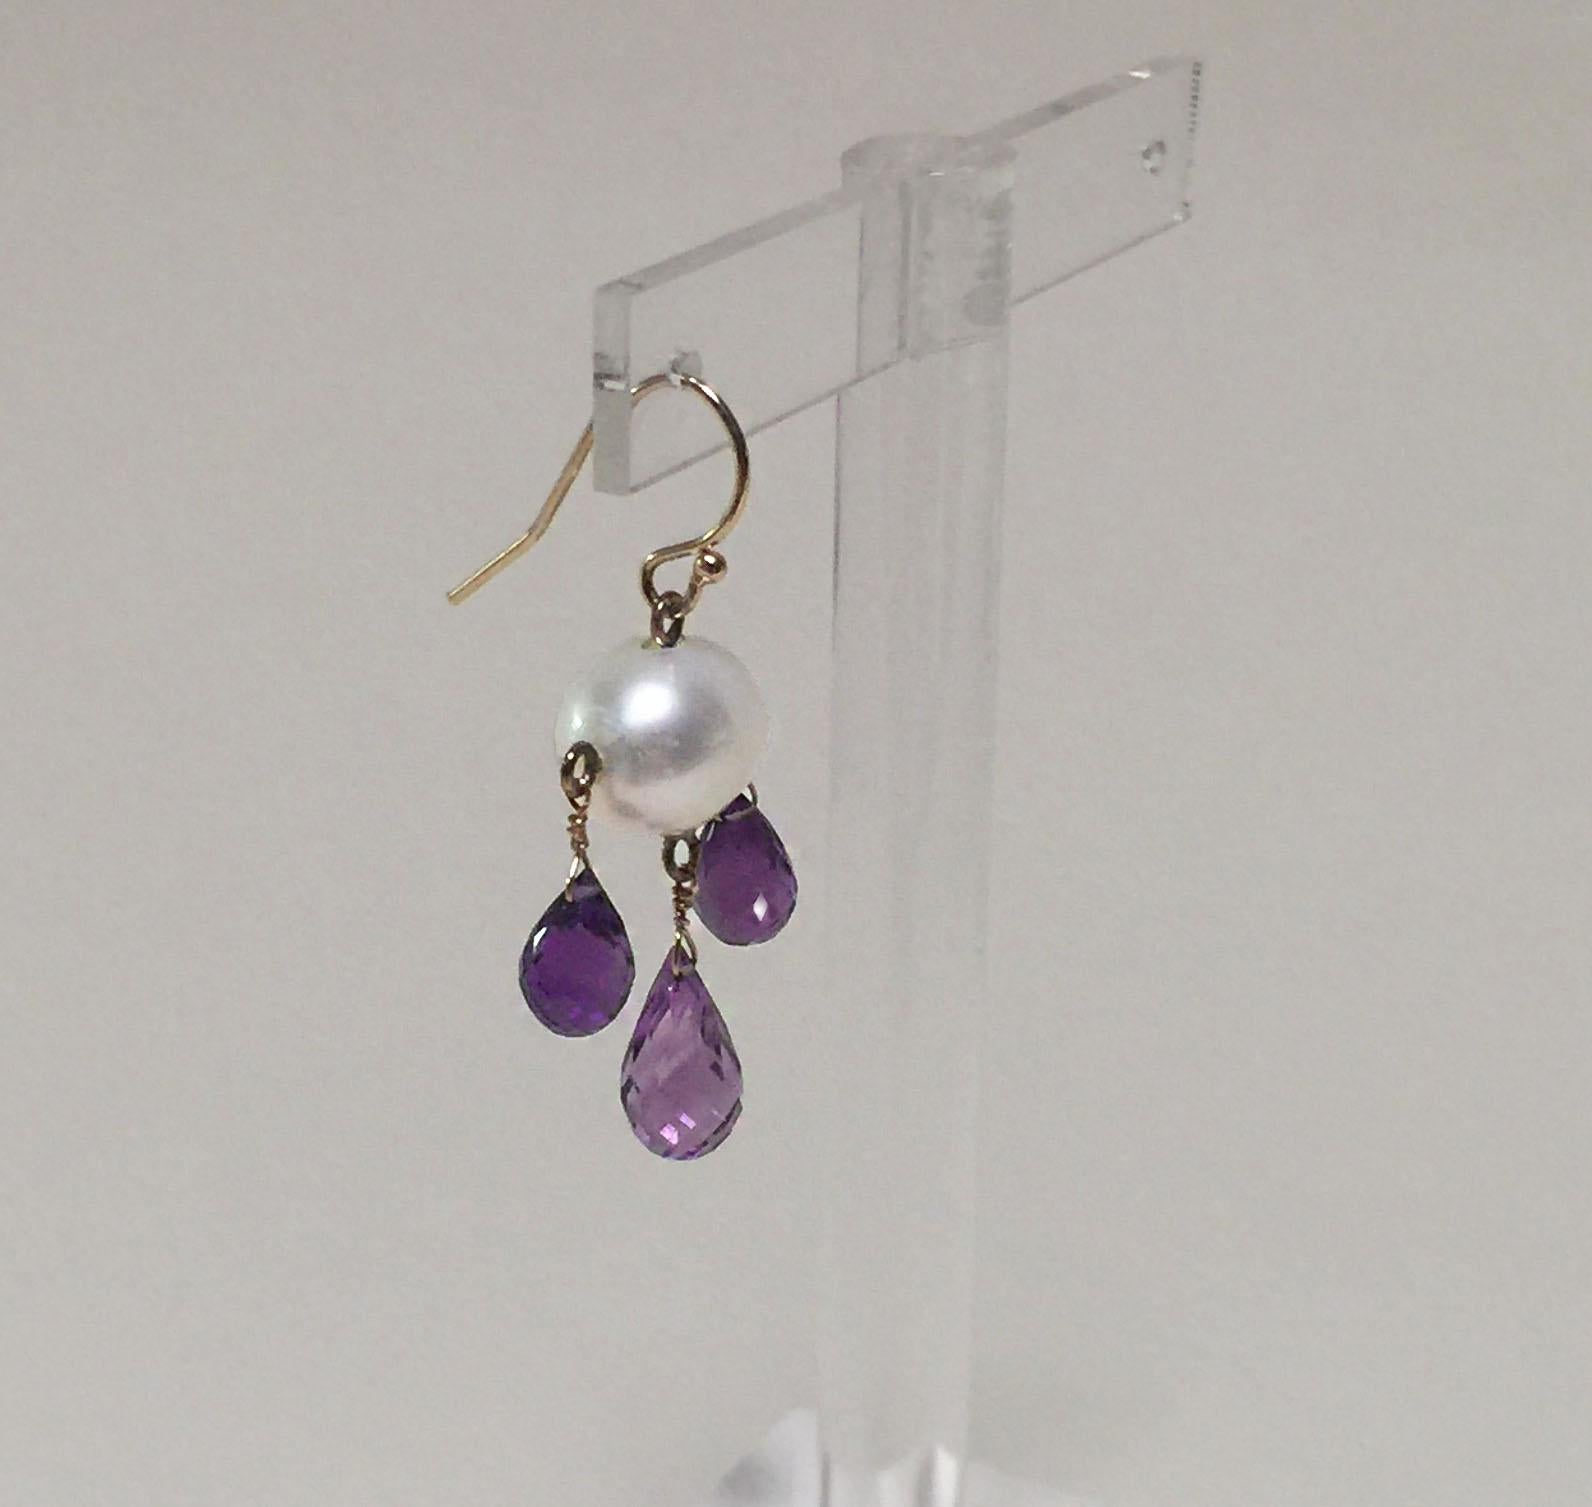 These white oval cultured pearl and amethyst drop earrings with 14 k yellow gold wiring and hook have a graceful look to them. At 1.8 inches long the earring classically frame the face. The 1 mm x 1.3 mm white pearl glows in contrast to the purple